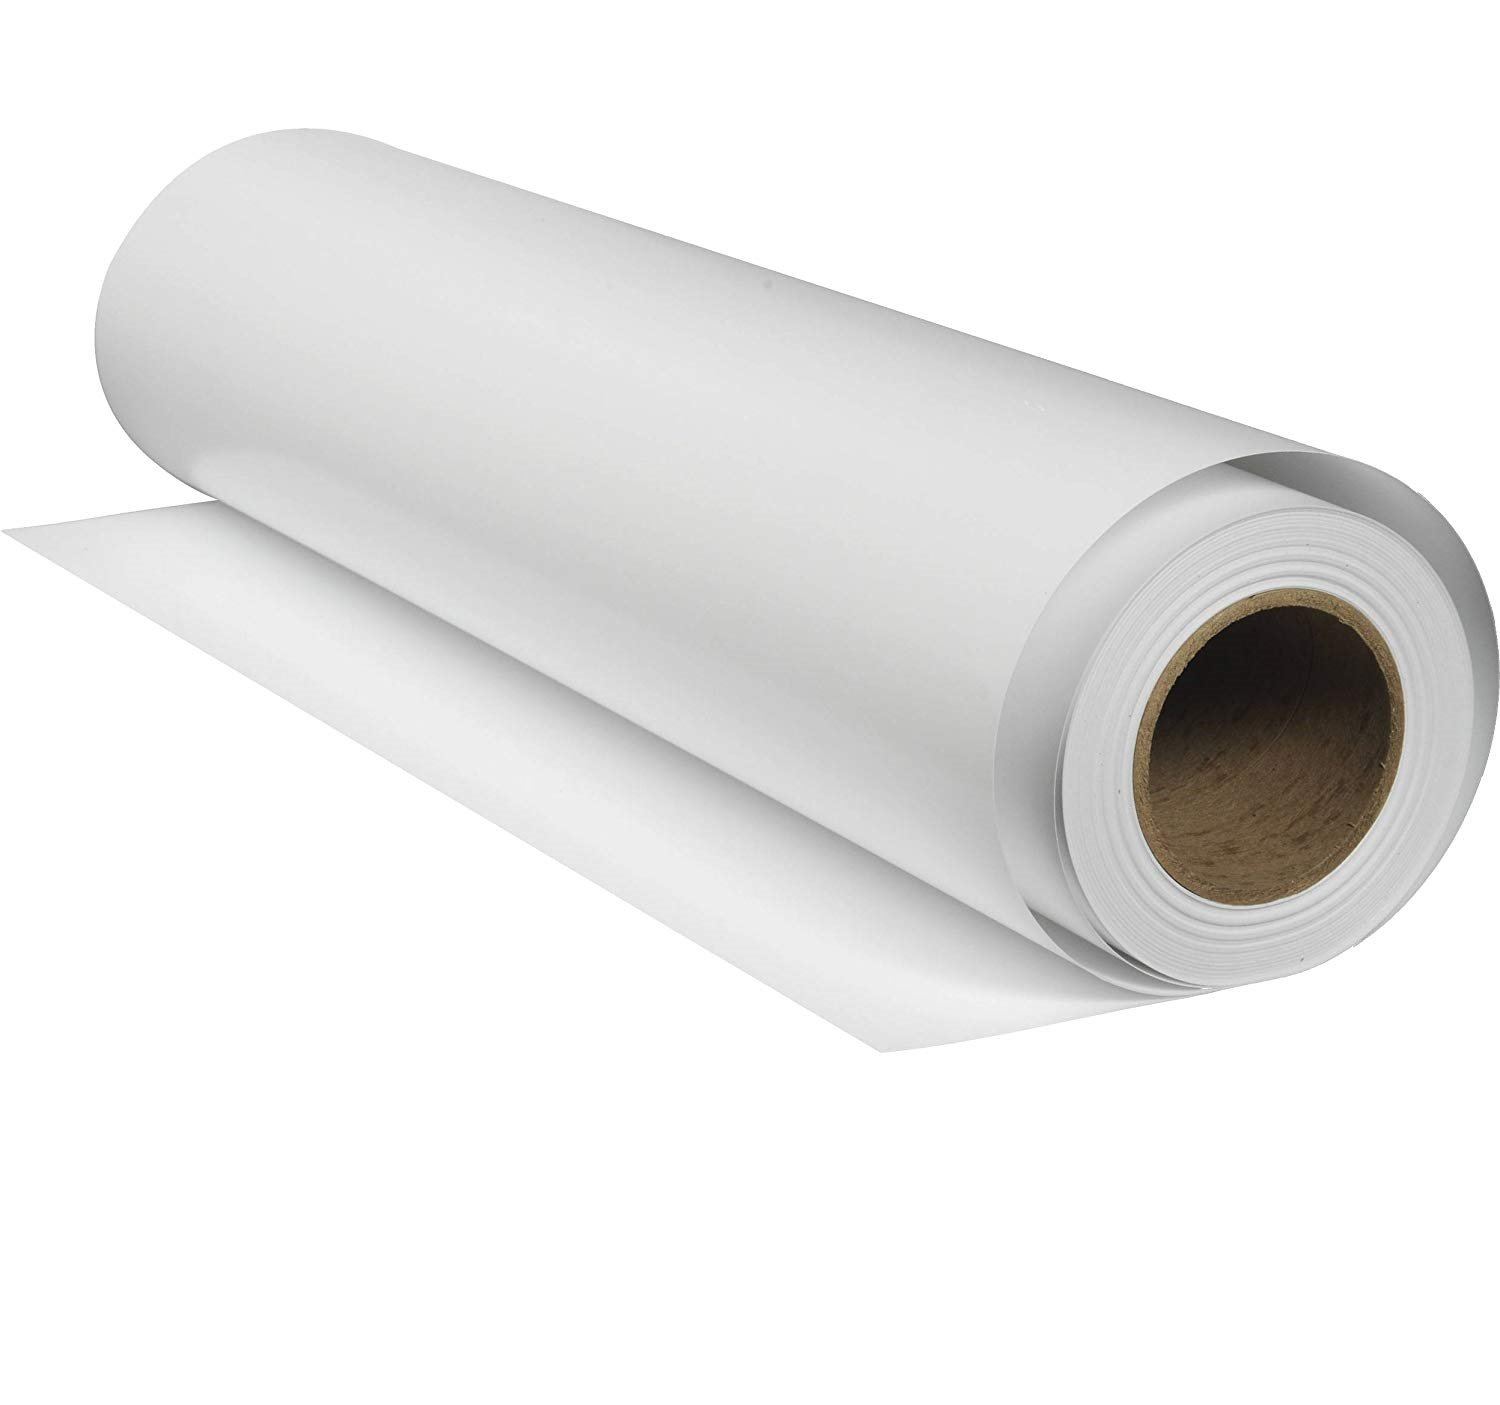 TexPrint XP Sublimation Transfer Paper 115ft Roll